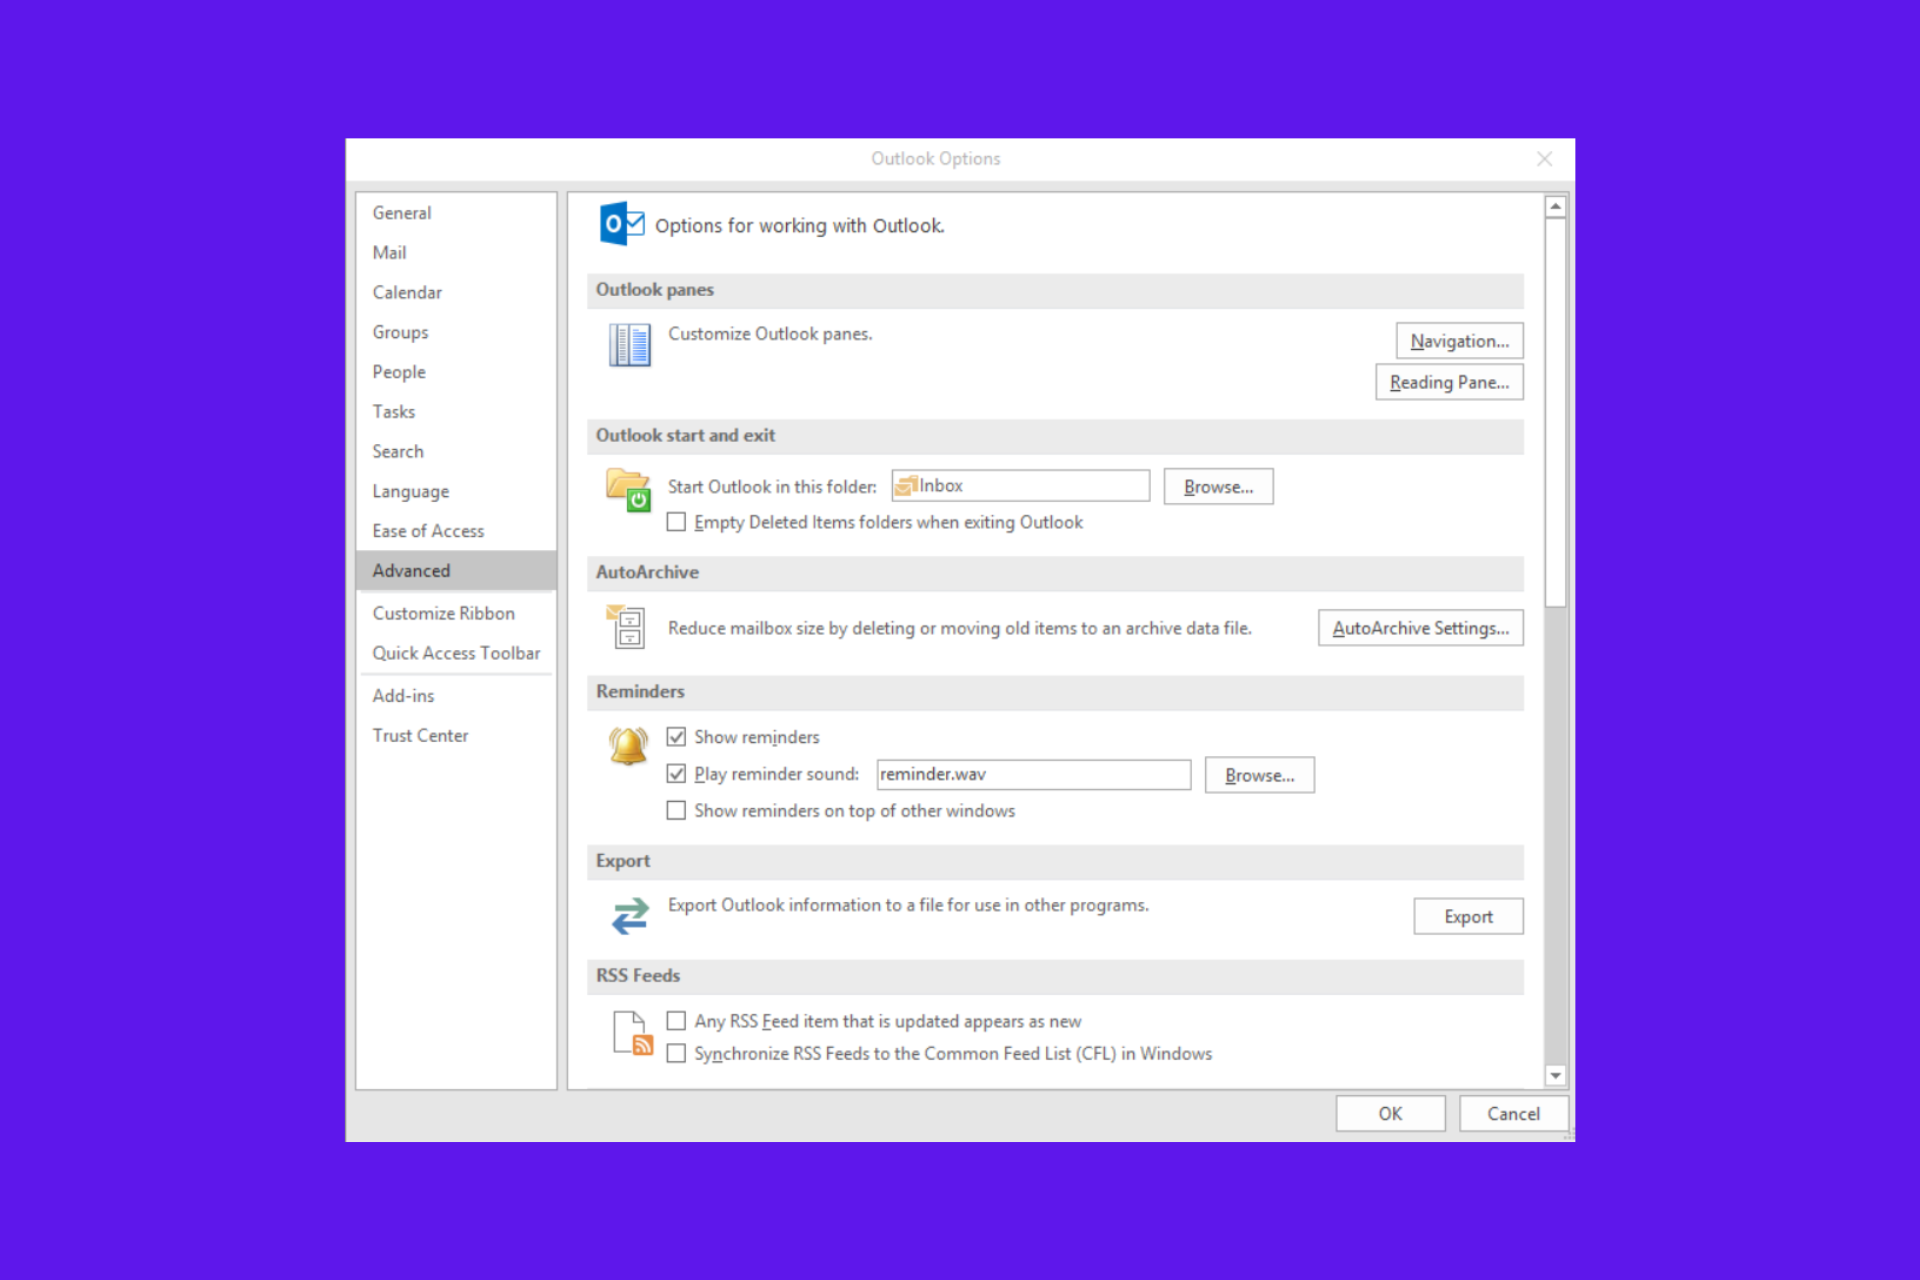 How to use Outlook AutoArchive settings